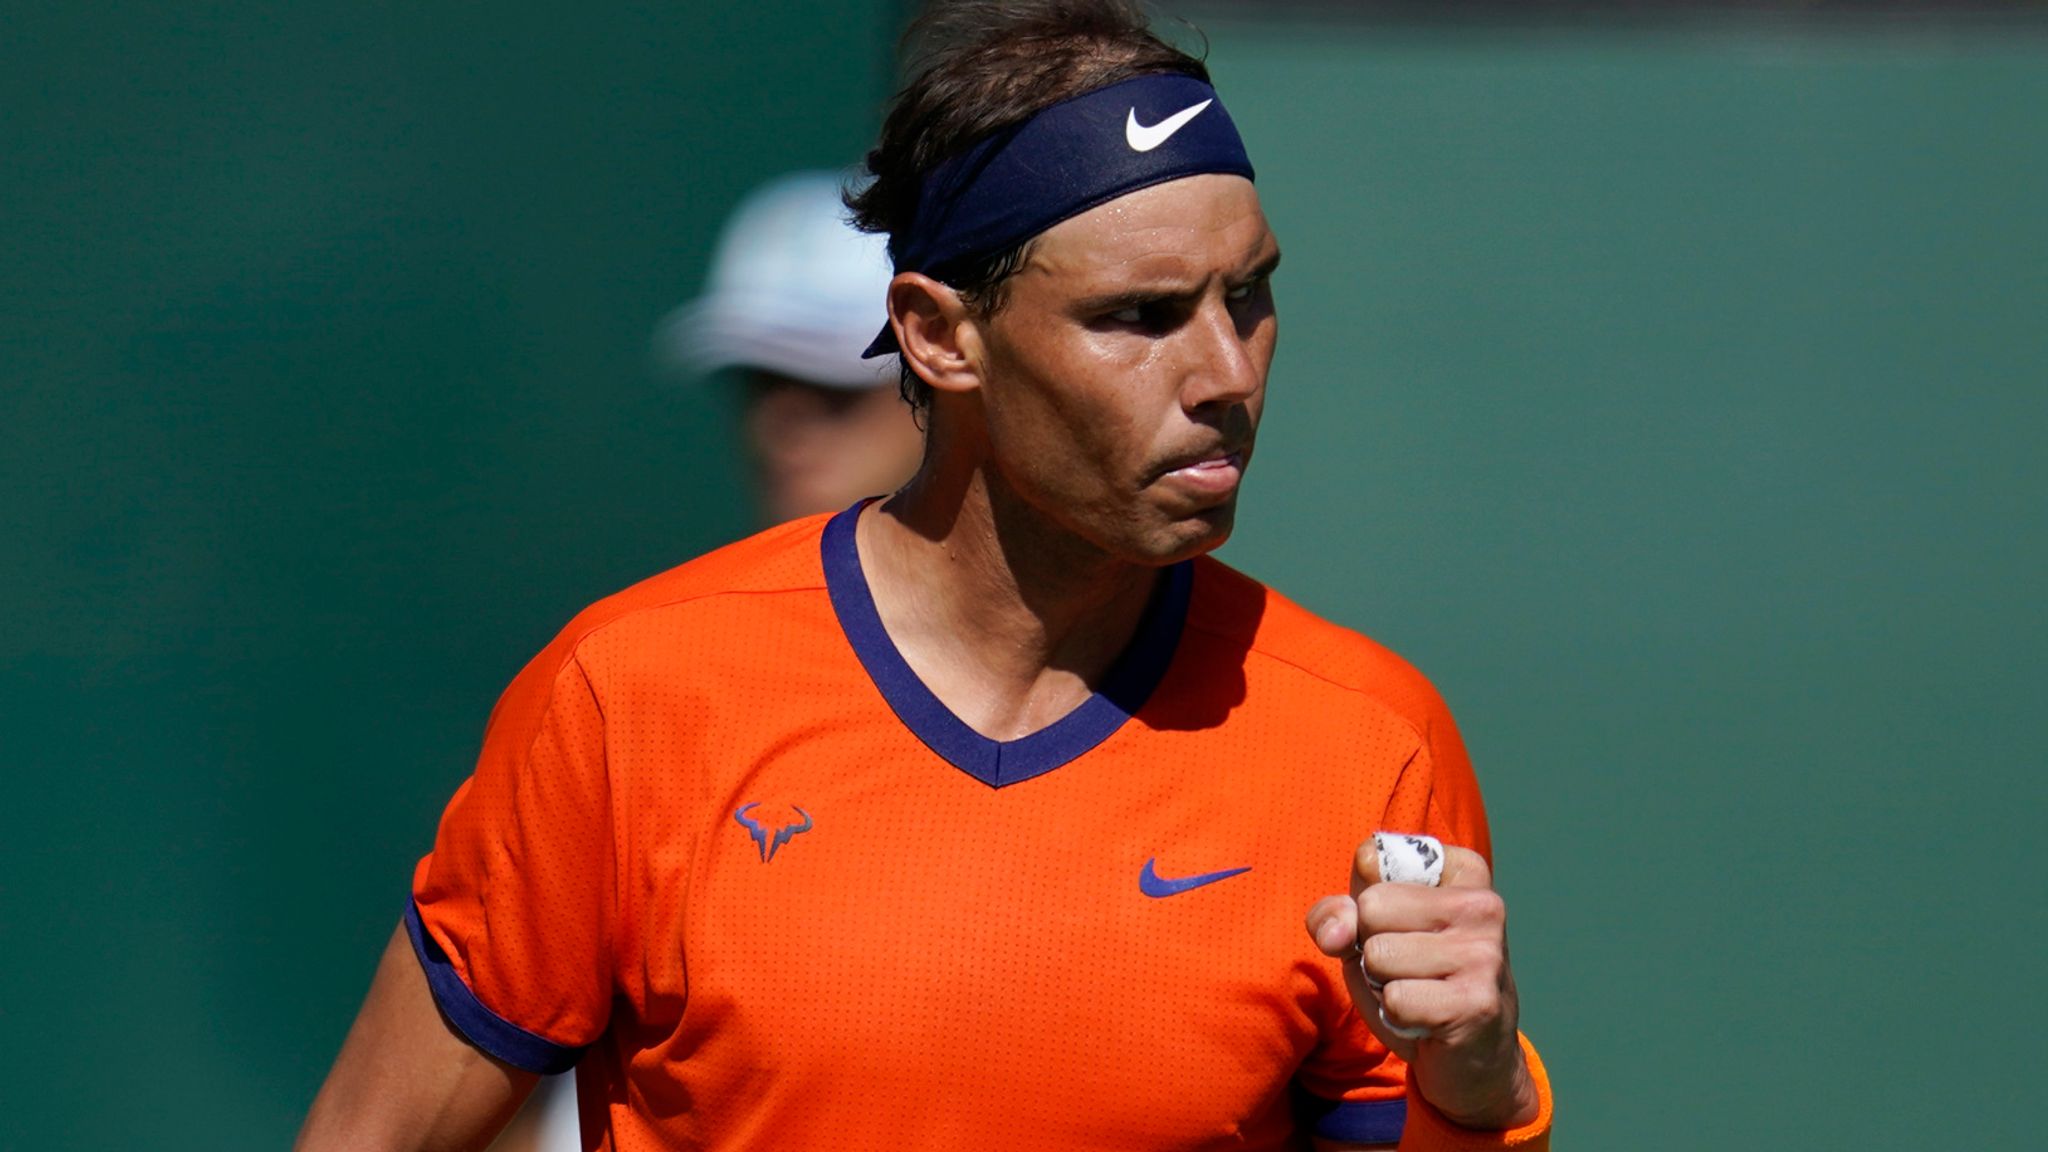 Rafael Nadal: Spaniard improves to 18-0 for 2022 to reach quarter-finals at  Indian Wells | Tennis News | Sky Sports